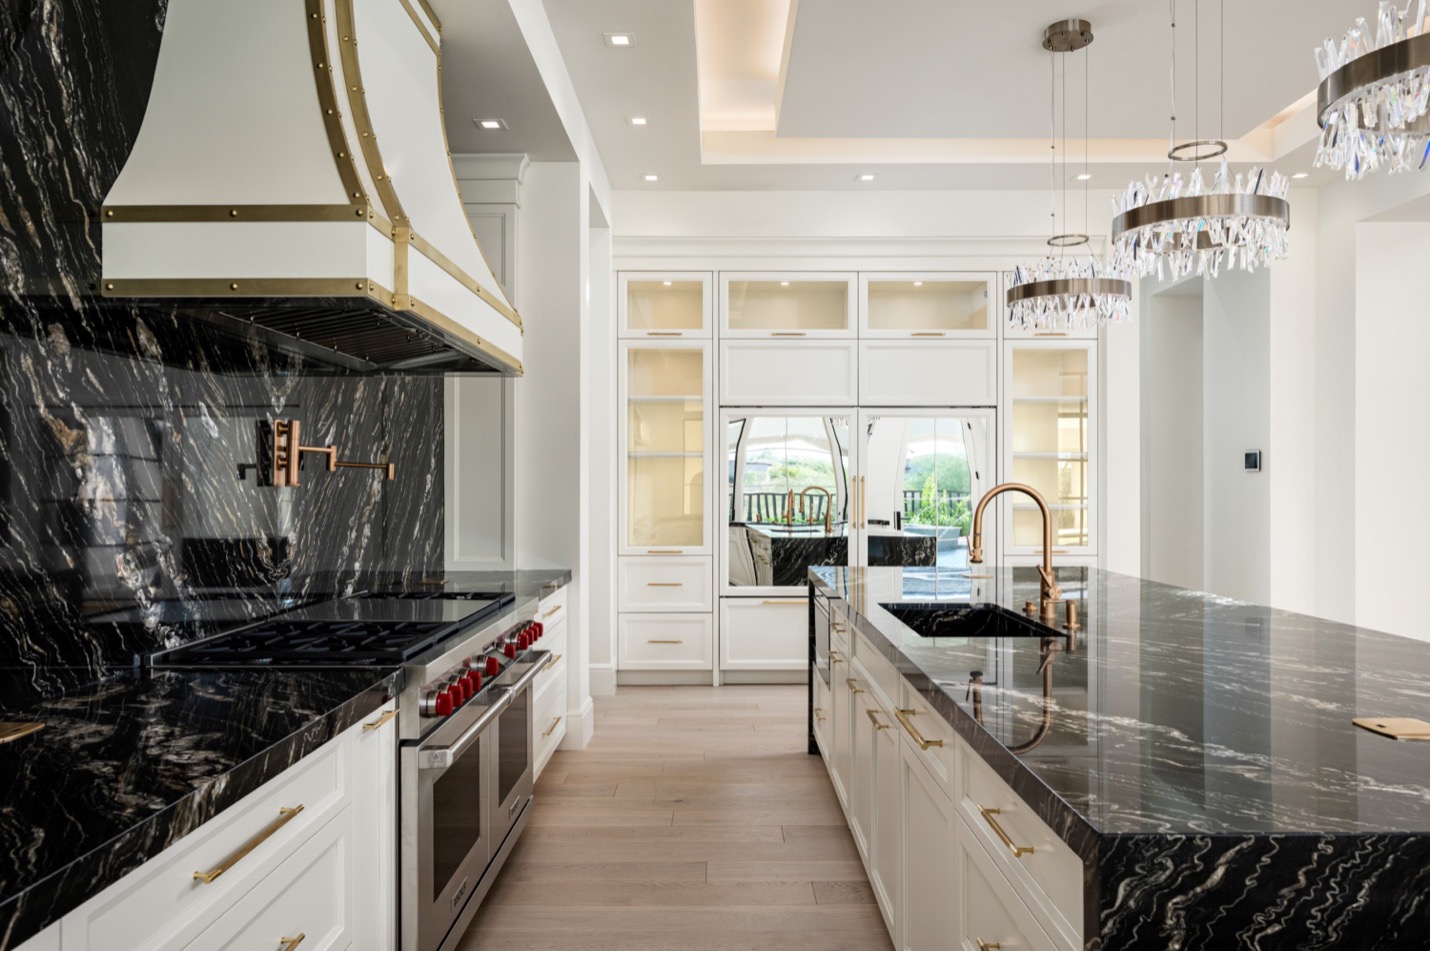 A luxurious, modern kitchen featuring sleek black marble countertops with striking white veining. The kitchen is equipped with high-end stainless steel appliances, including a professional-grade stove with red knobs and a stylish range hood adorned with gold accents. The island includes a deep sink with a gold faucet, complemented by contemporary pendant lights with crystal detailing that hang above, adding elegance and sparkle to the space. The cabinetry is white with gold handles, and a built-in refrigerator blends seamlessly with the cabinets. The room's design is enhanced by a tray ceiling with recessed lighting, creating a bright and inviting atmosphere.